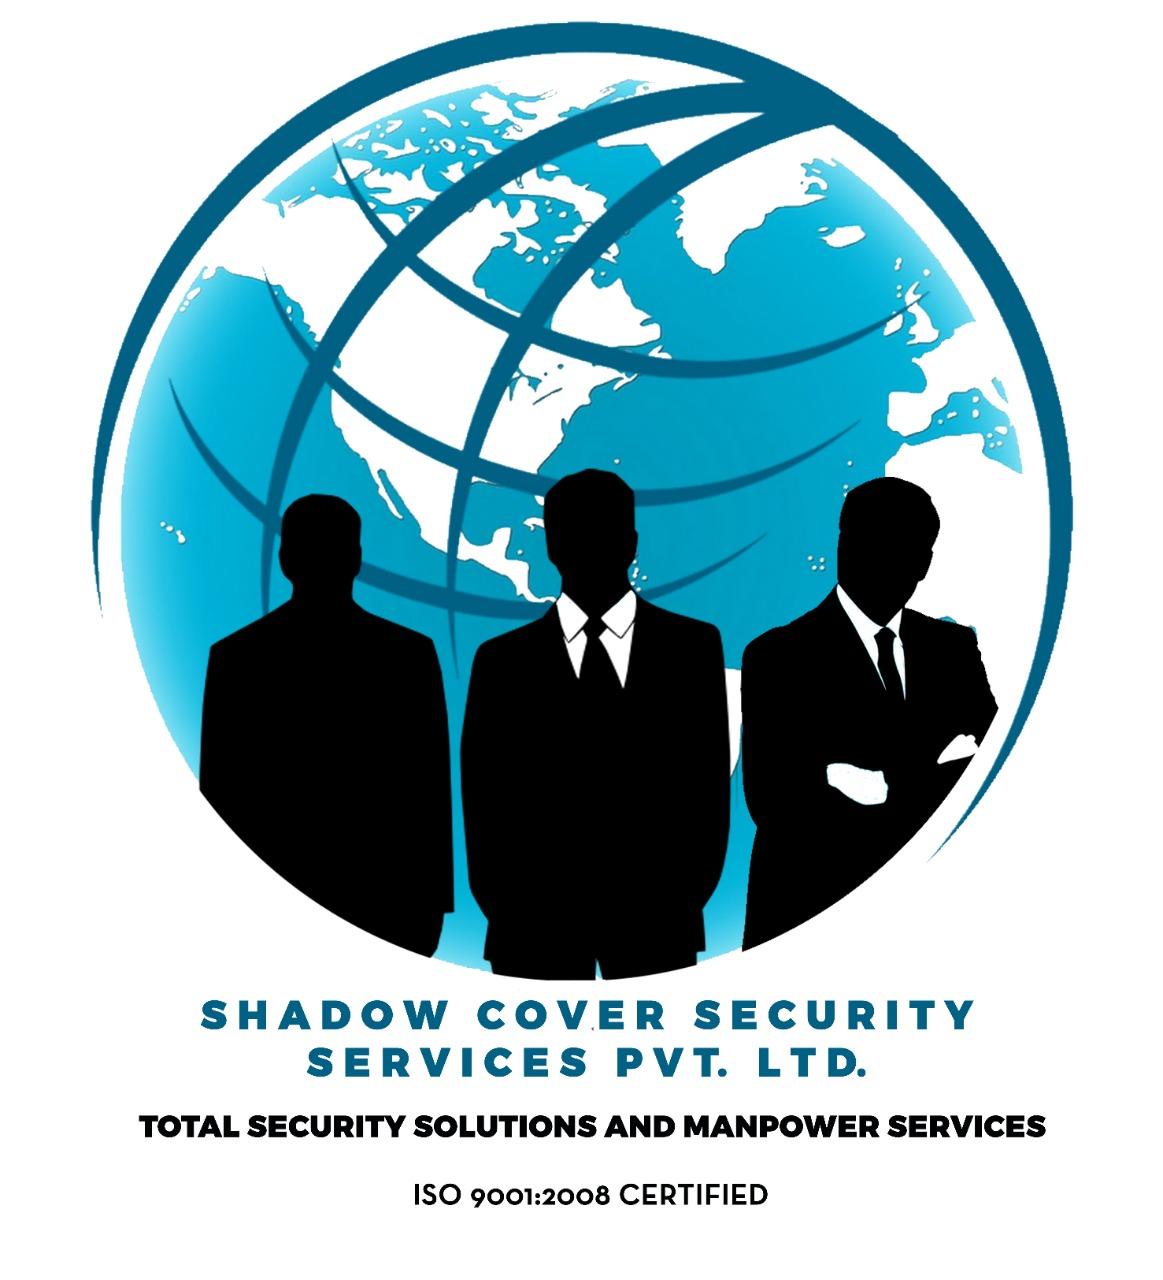 SHADOW COVER SECURITY SERVICES PRIVATE LIMITED